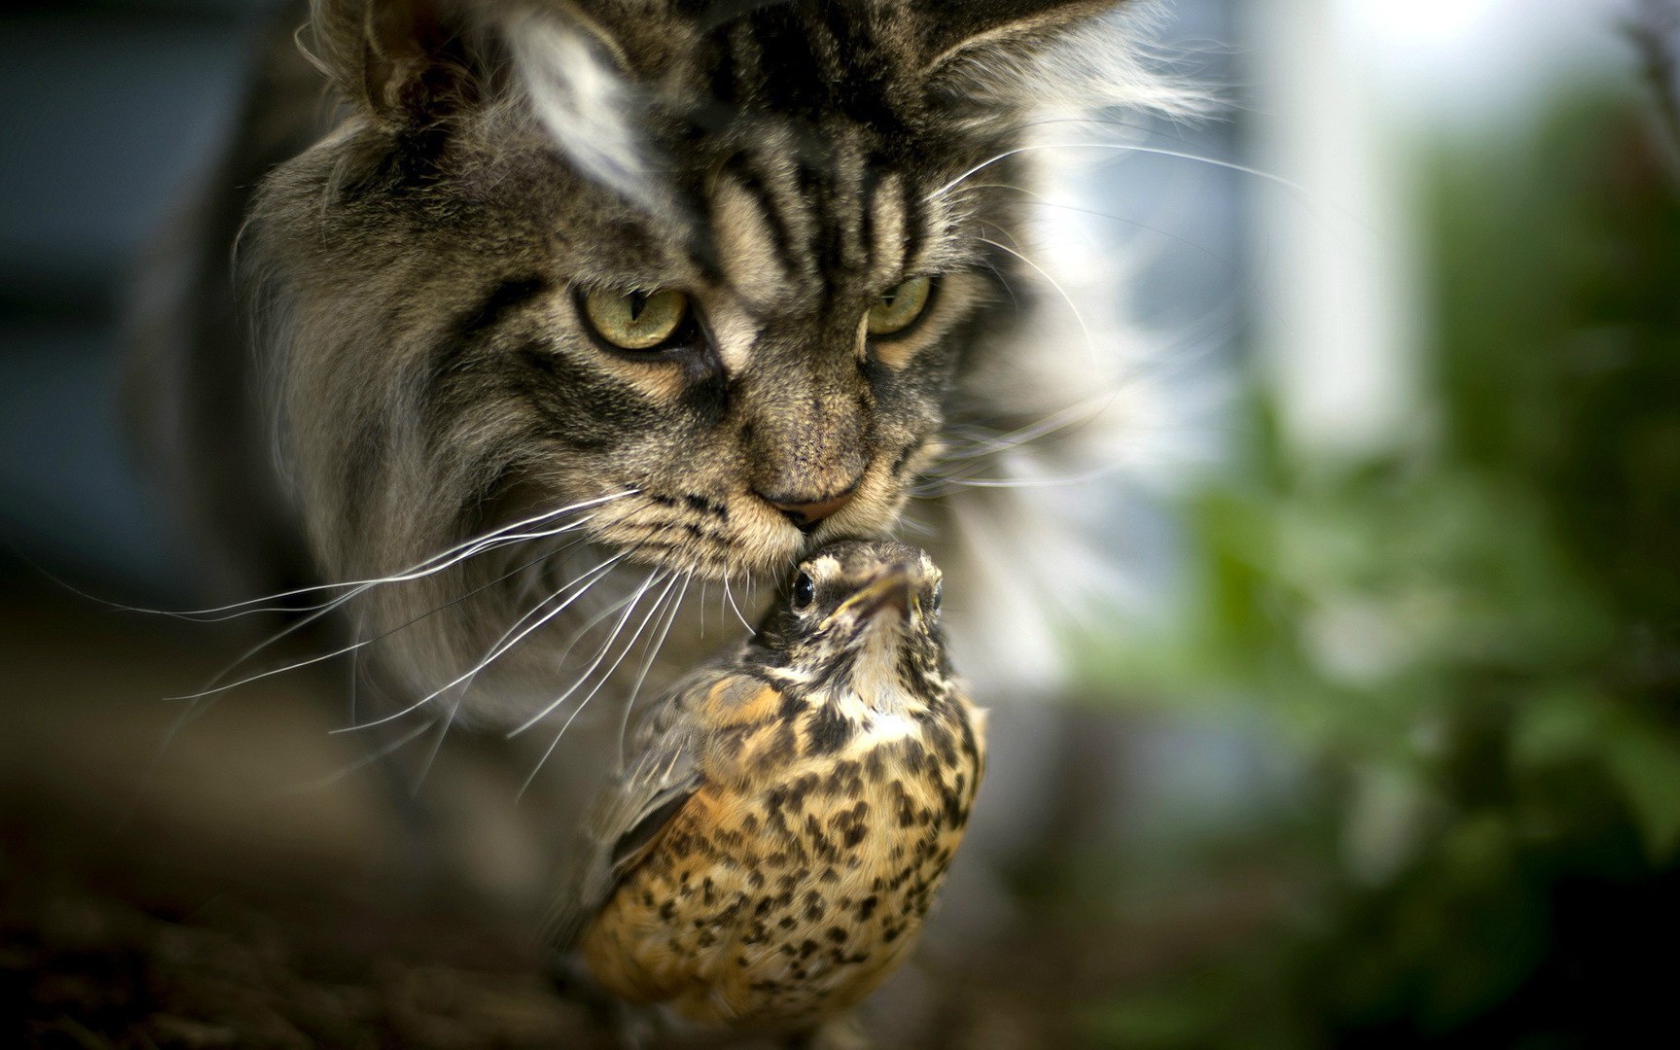 Unusual friendship of a cat and a bird